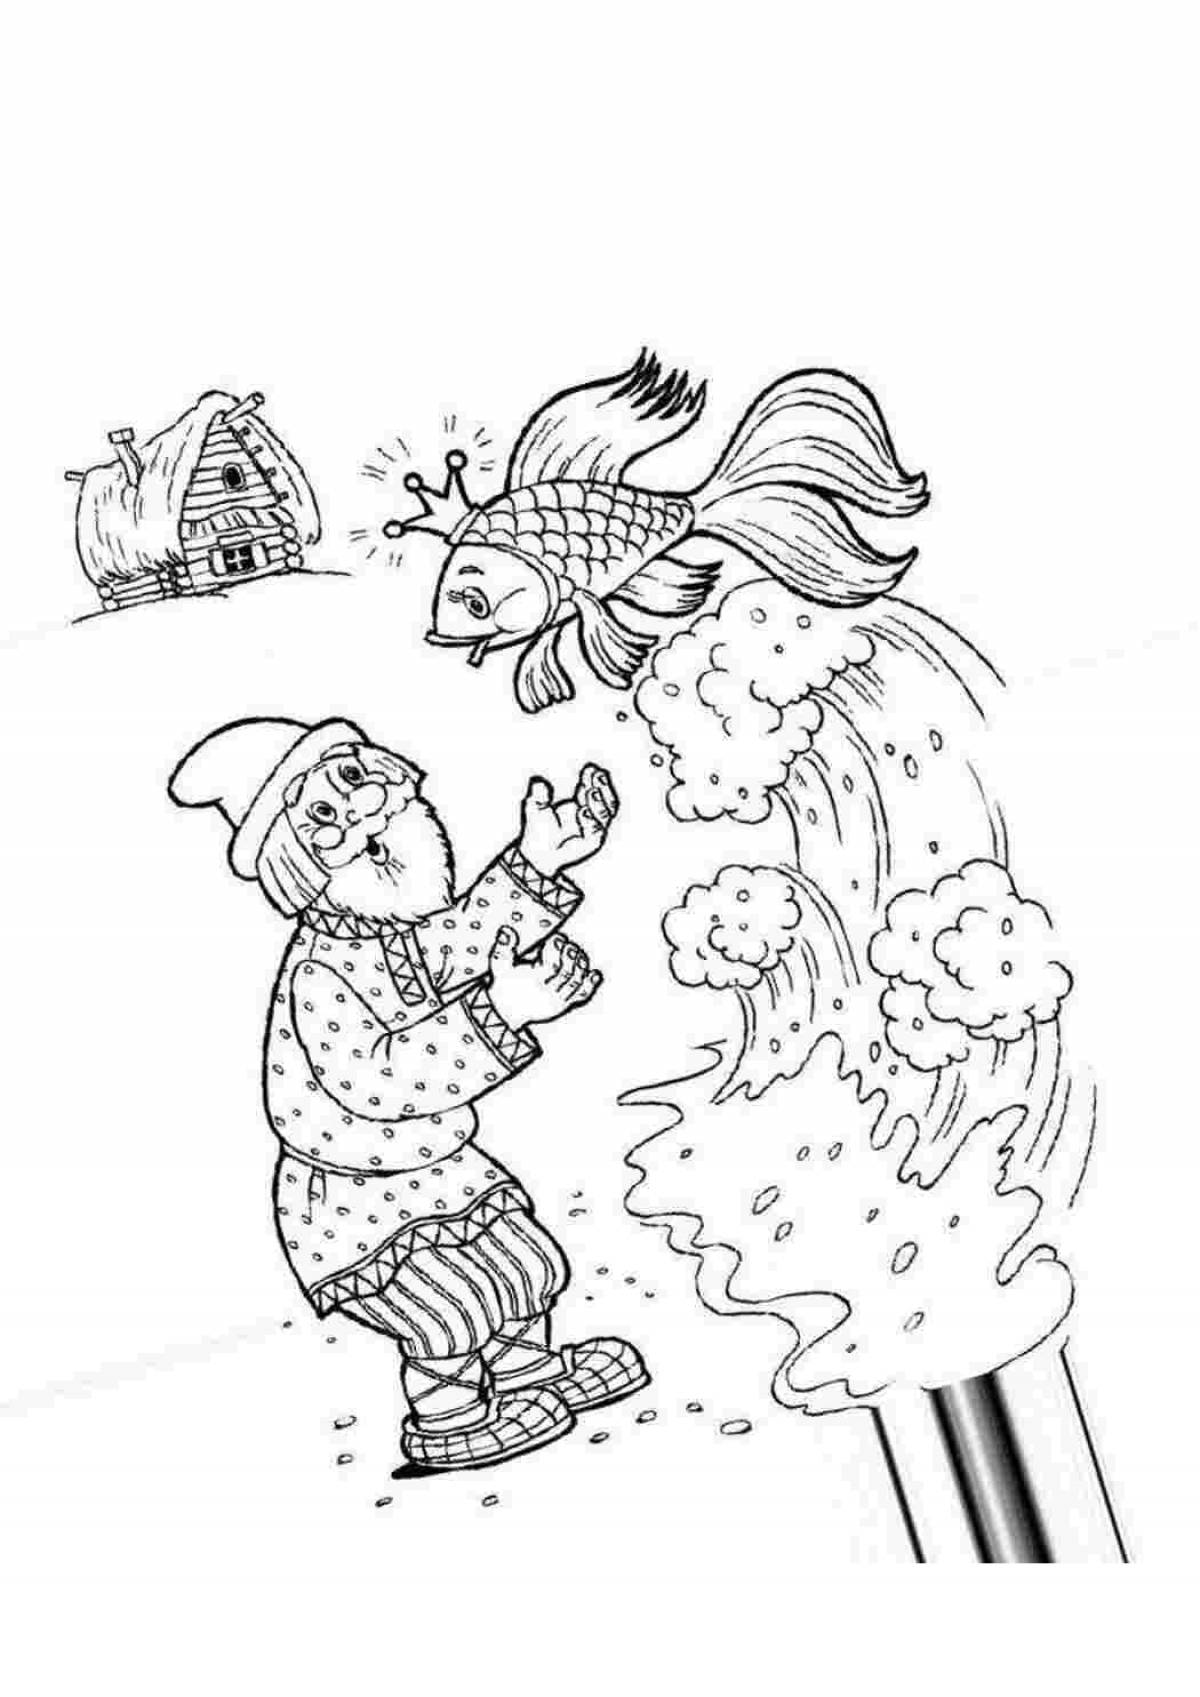 Adorable fish and fish coloring book for kids